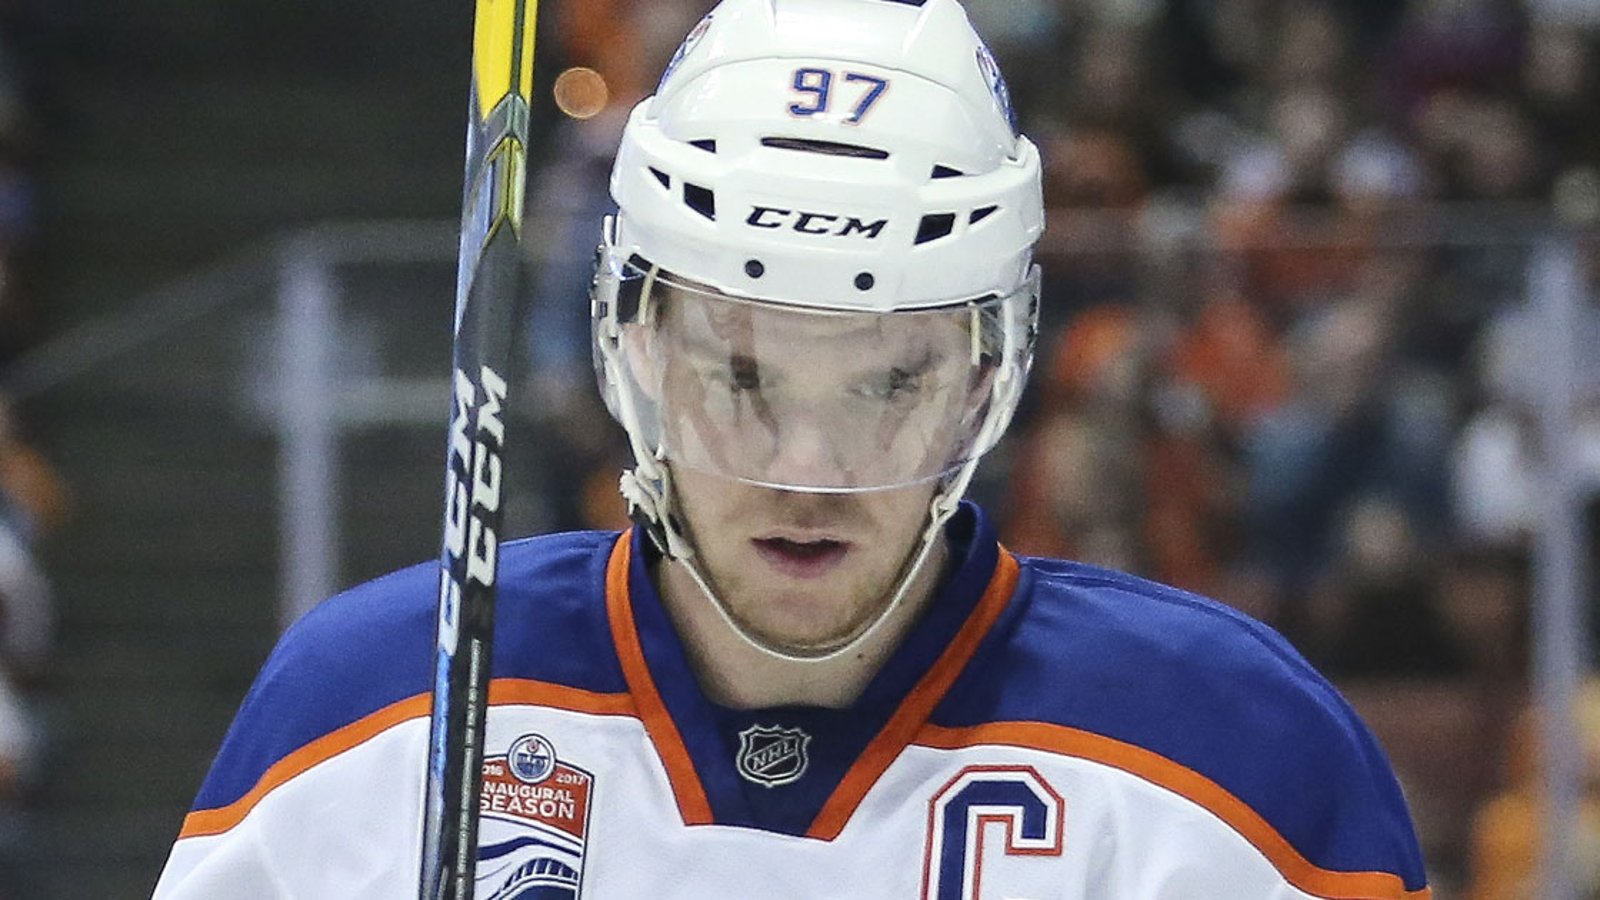 McDavid to blame for Oilers recent losses? 